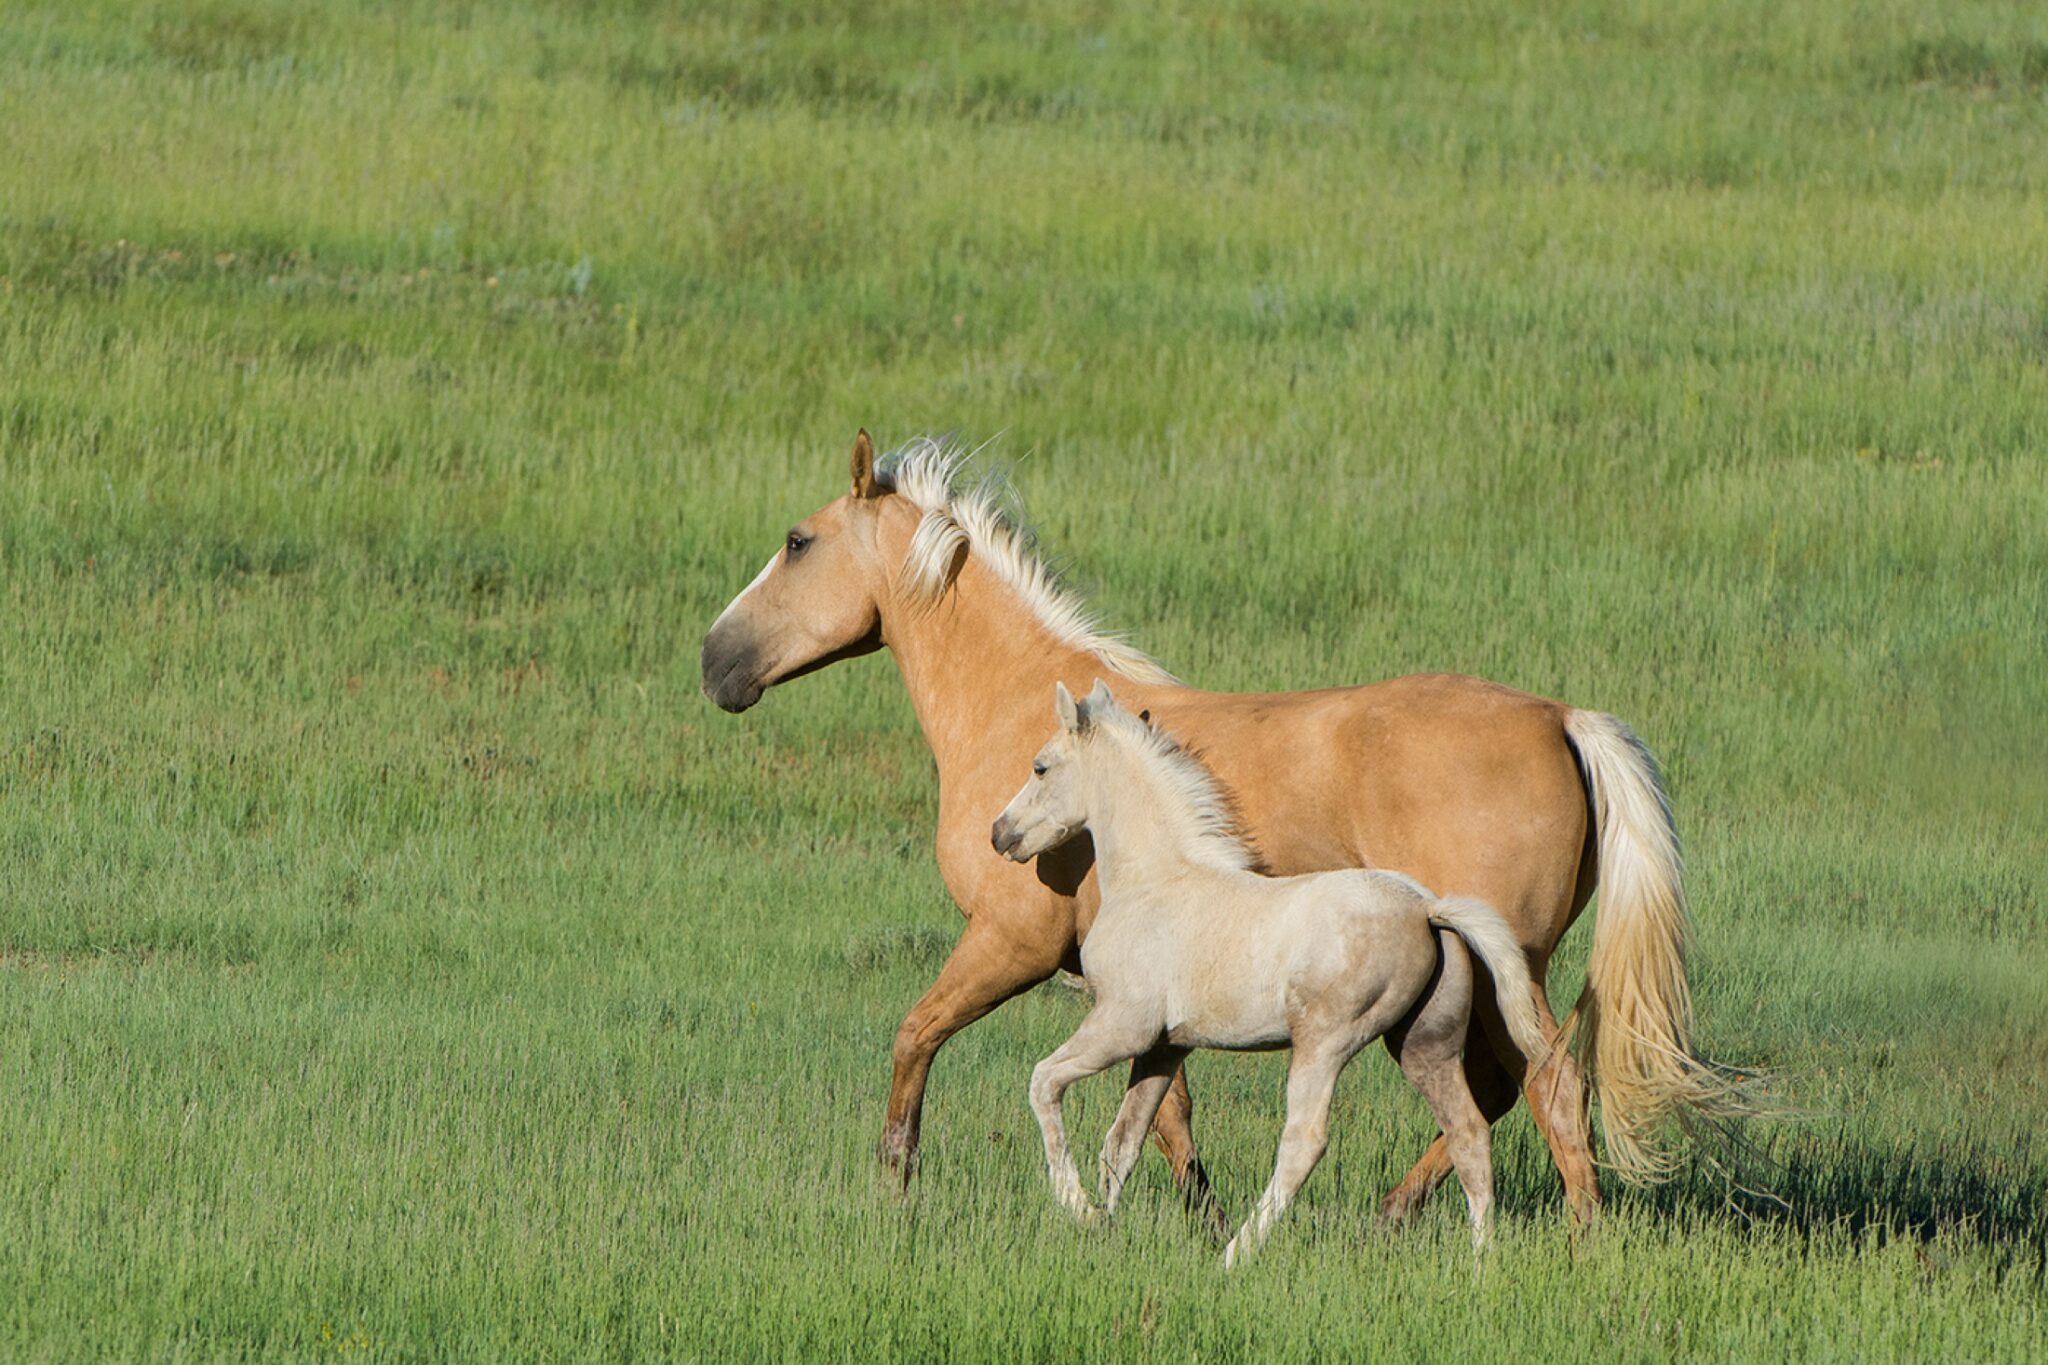 A foal with its mother running in a field